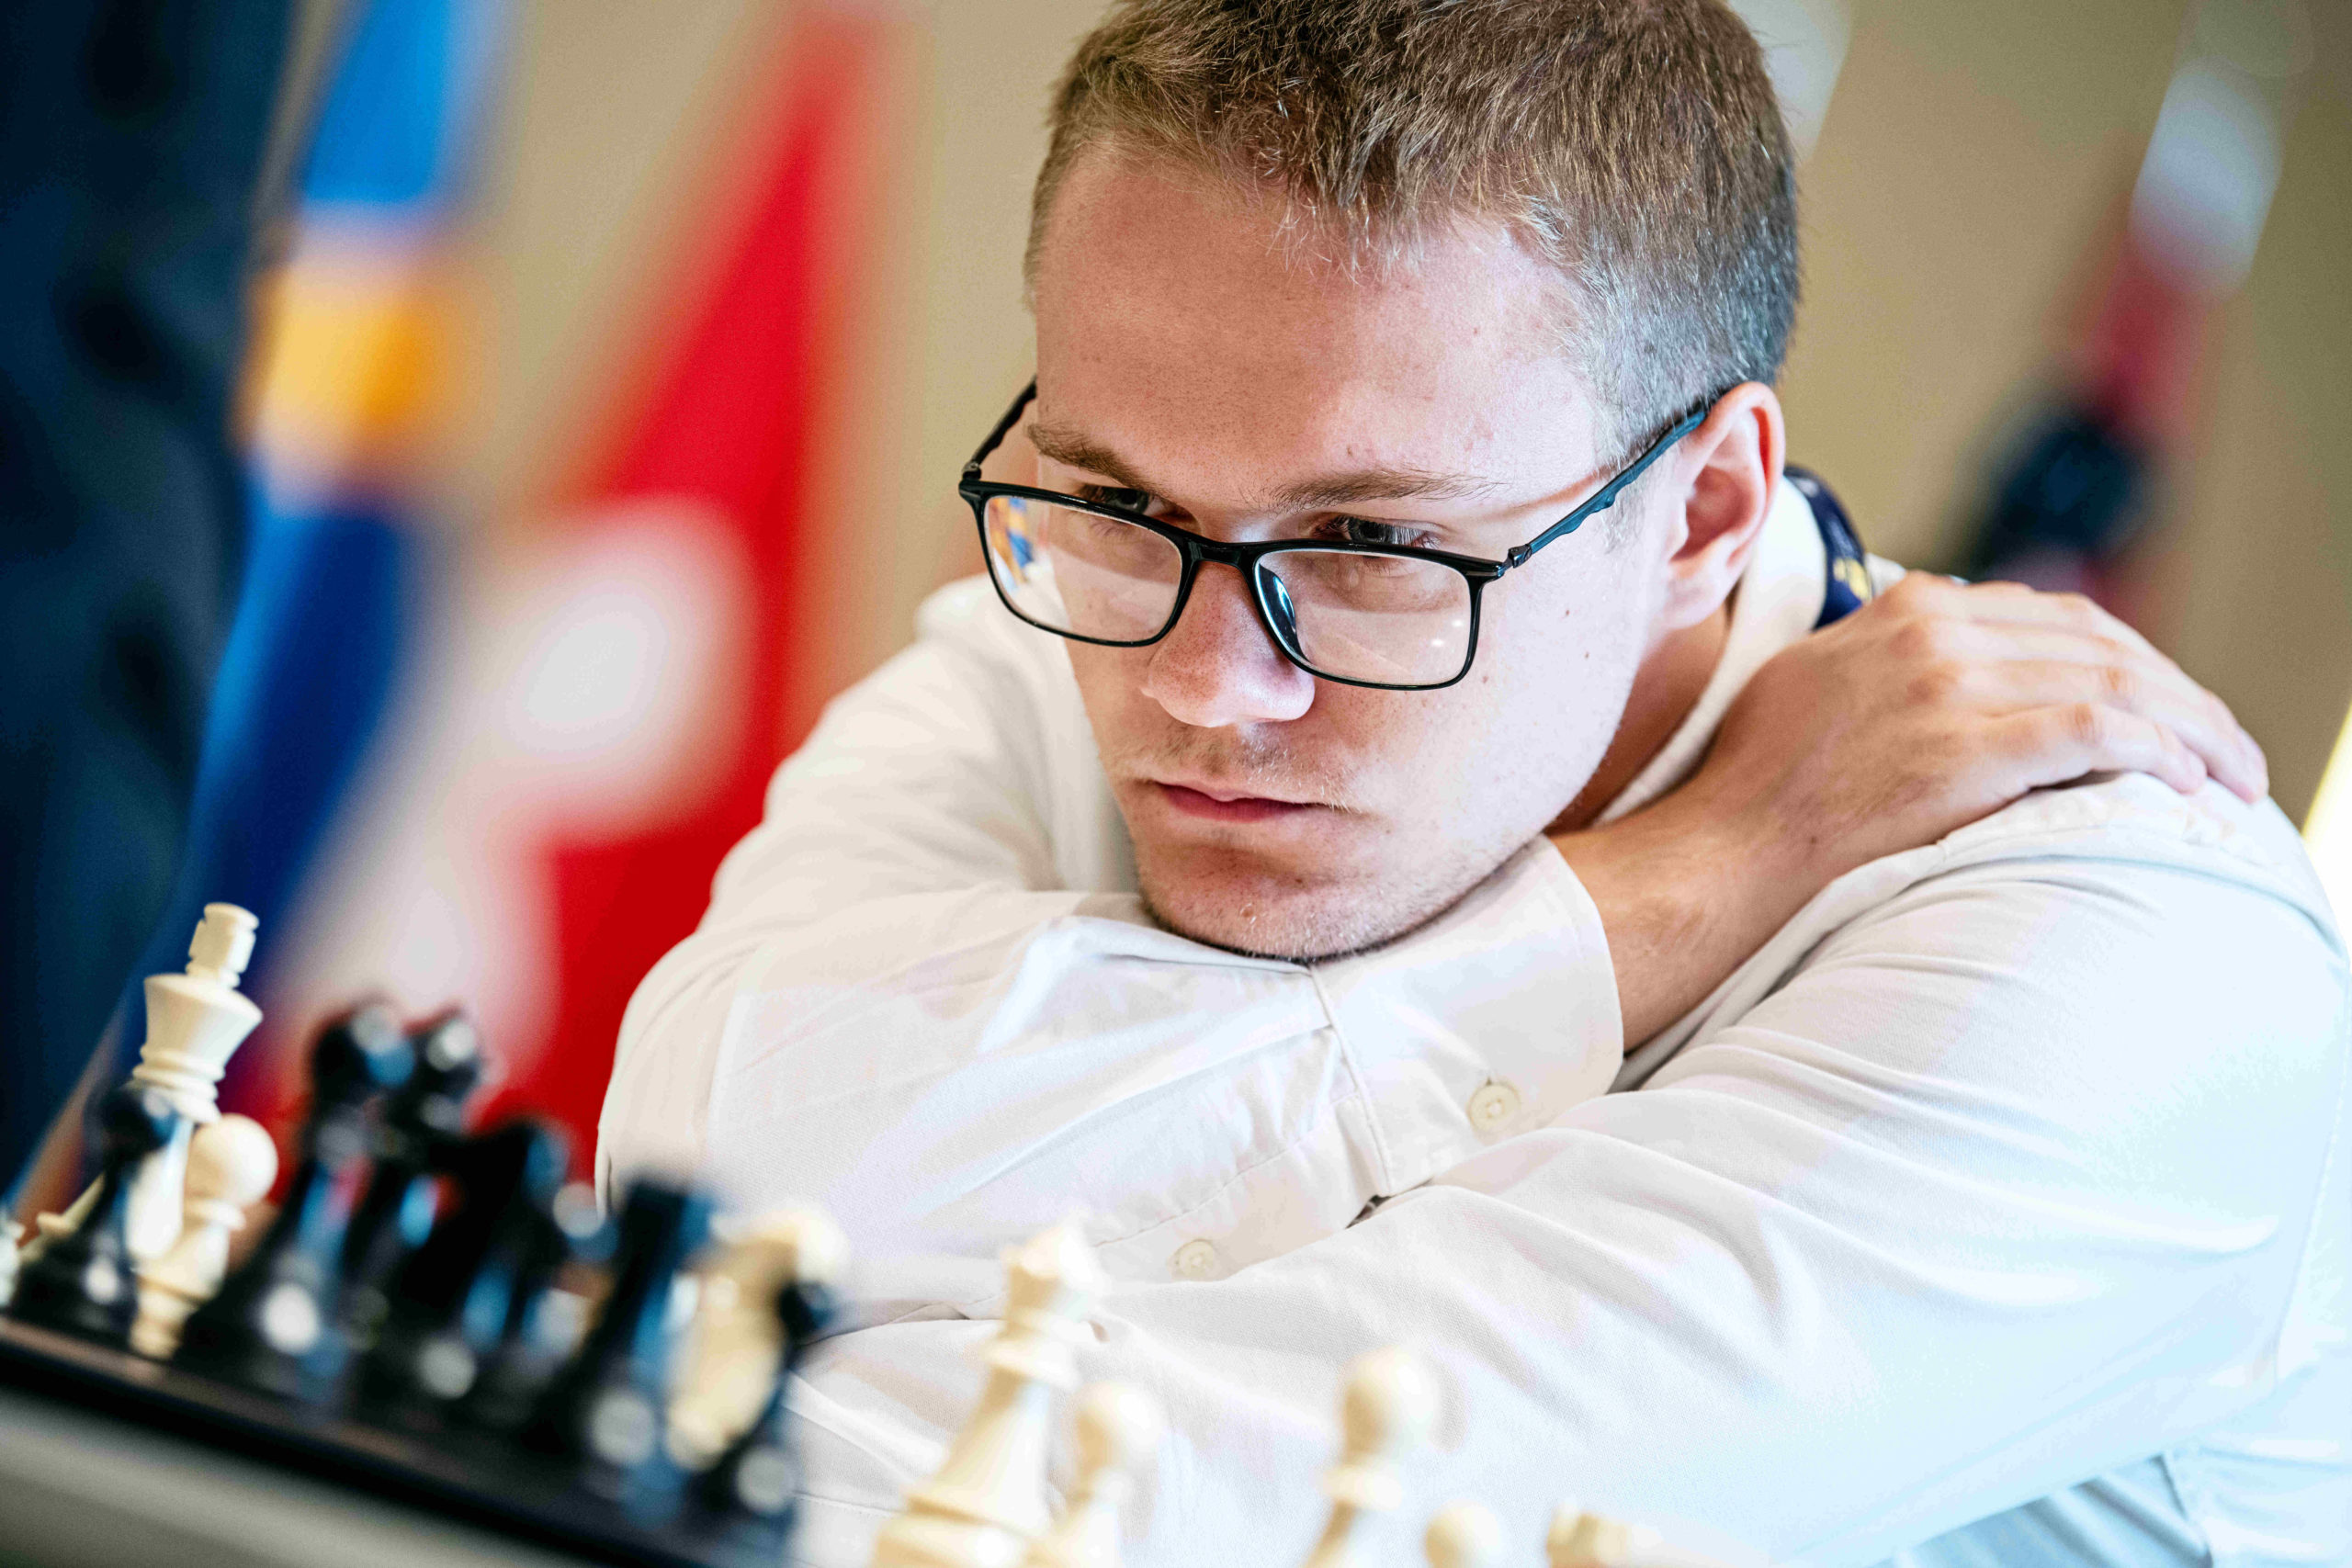 FIDE - International Chess Federation - Four rounds are played at